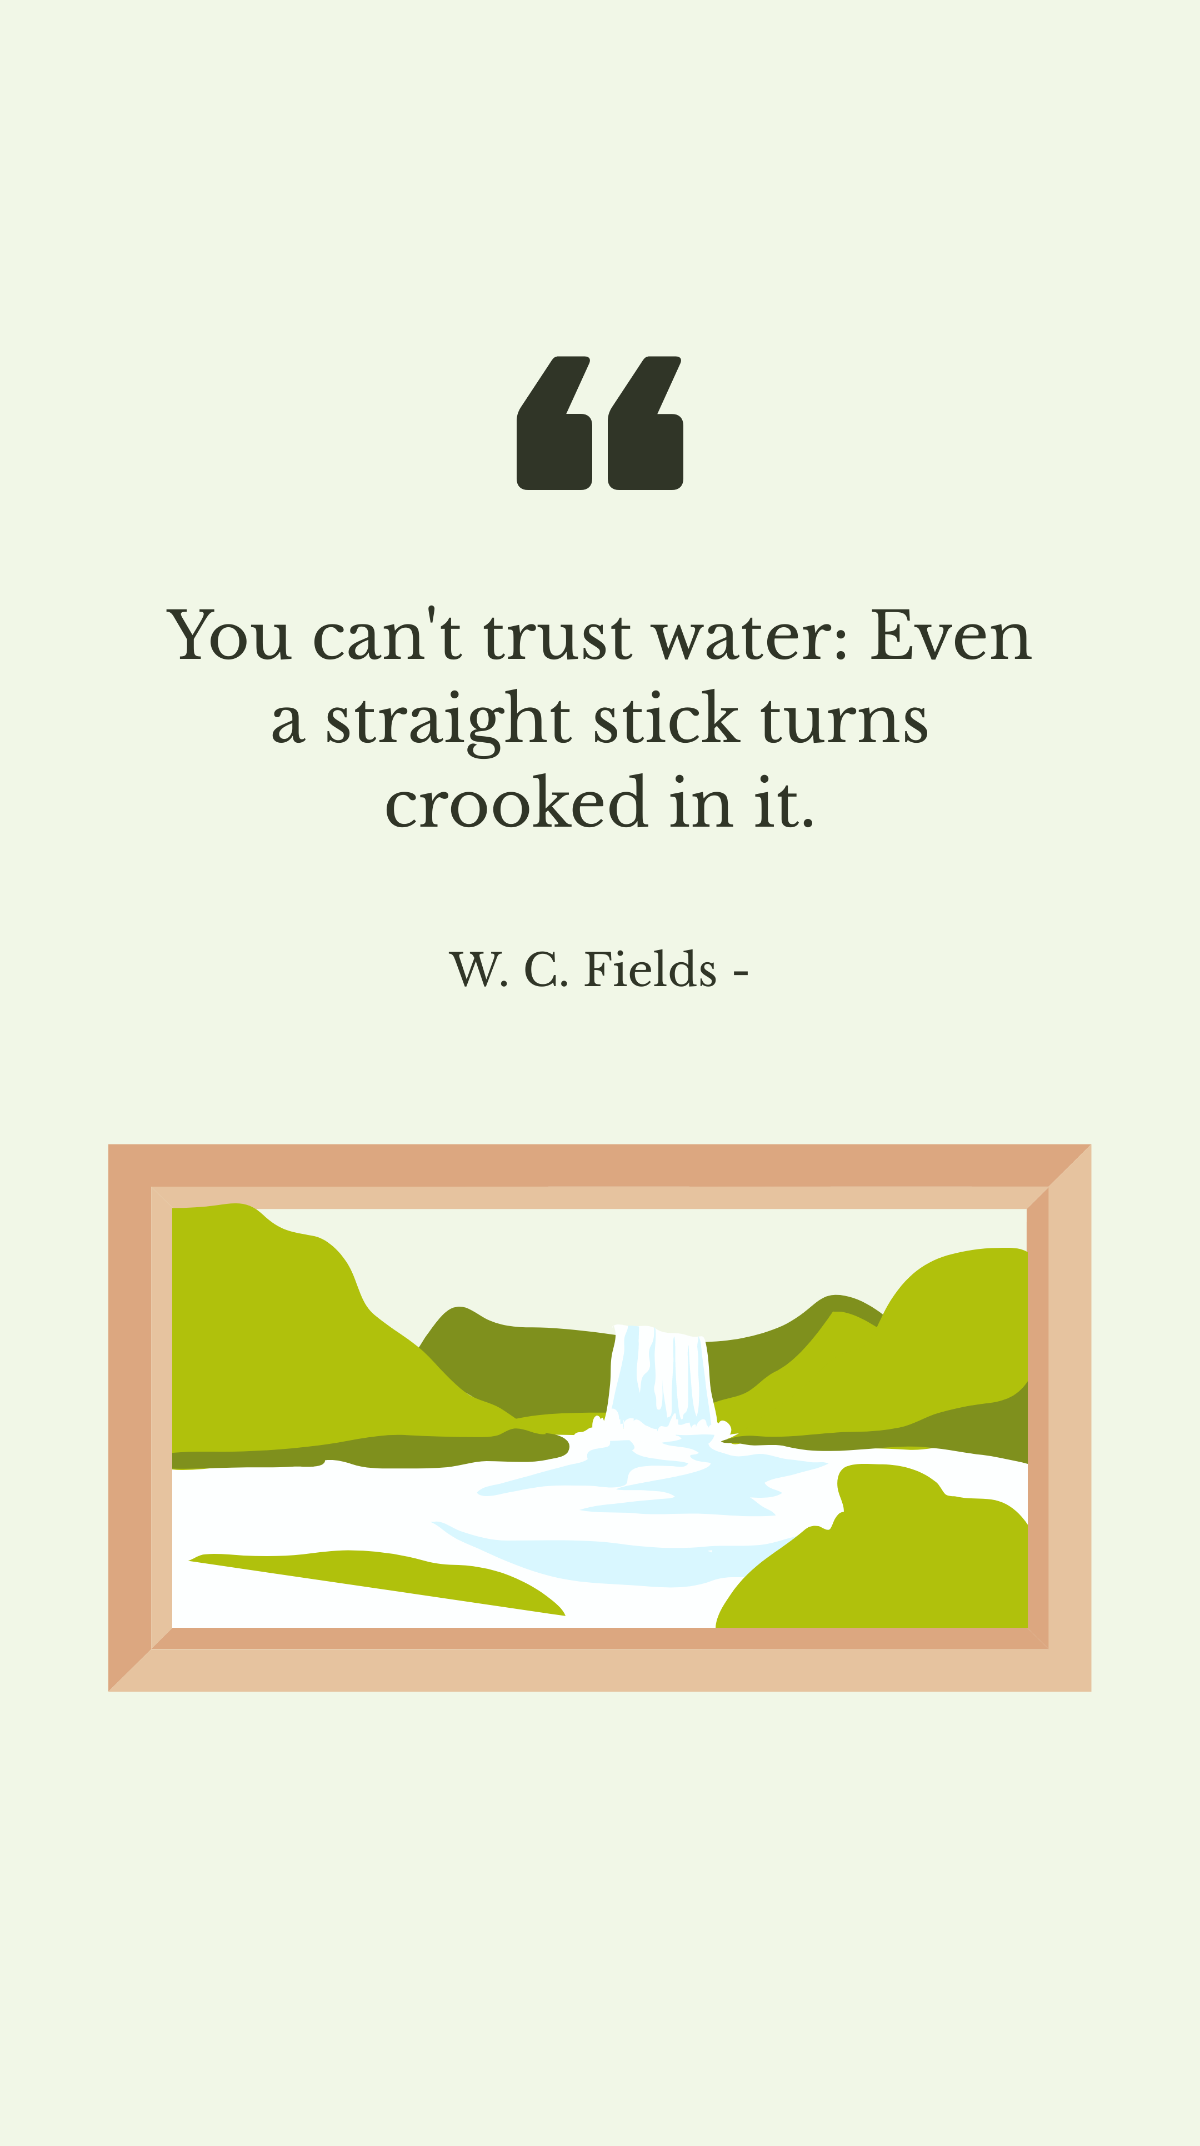 W. C. Fields - You can't trust water: Even a straight stick turns crooked in it. Template